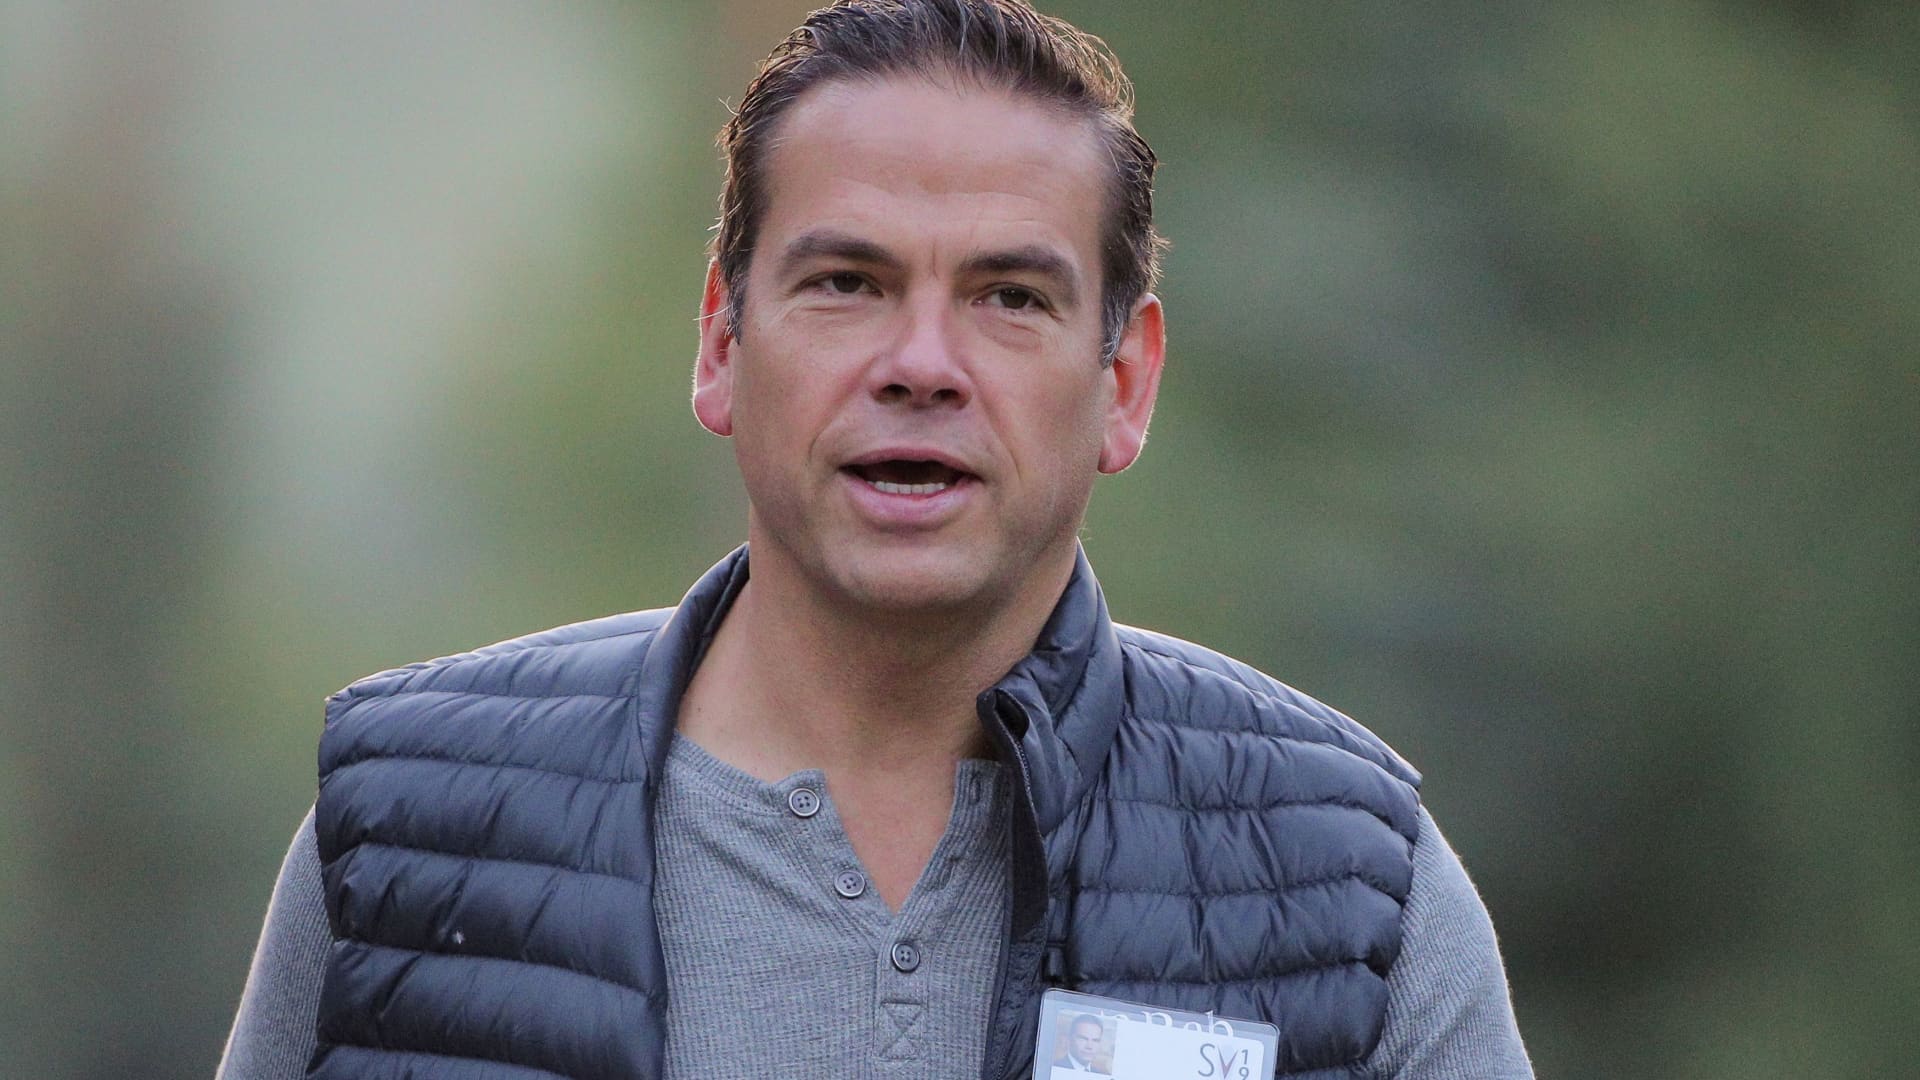 Fox CEO Lachlan Murdoch to face questioning as a part of Dominion Voting’s .6 billion lawsuit